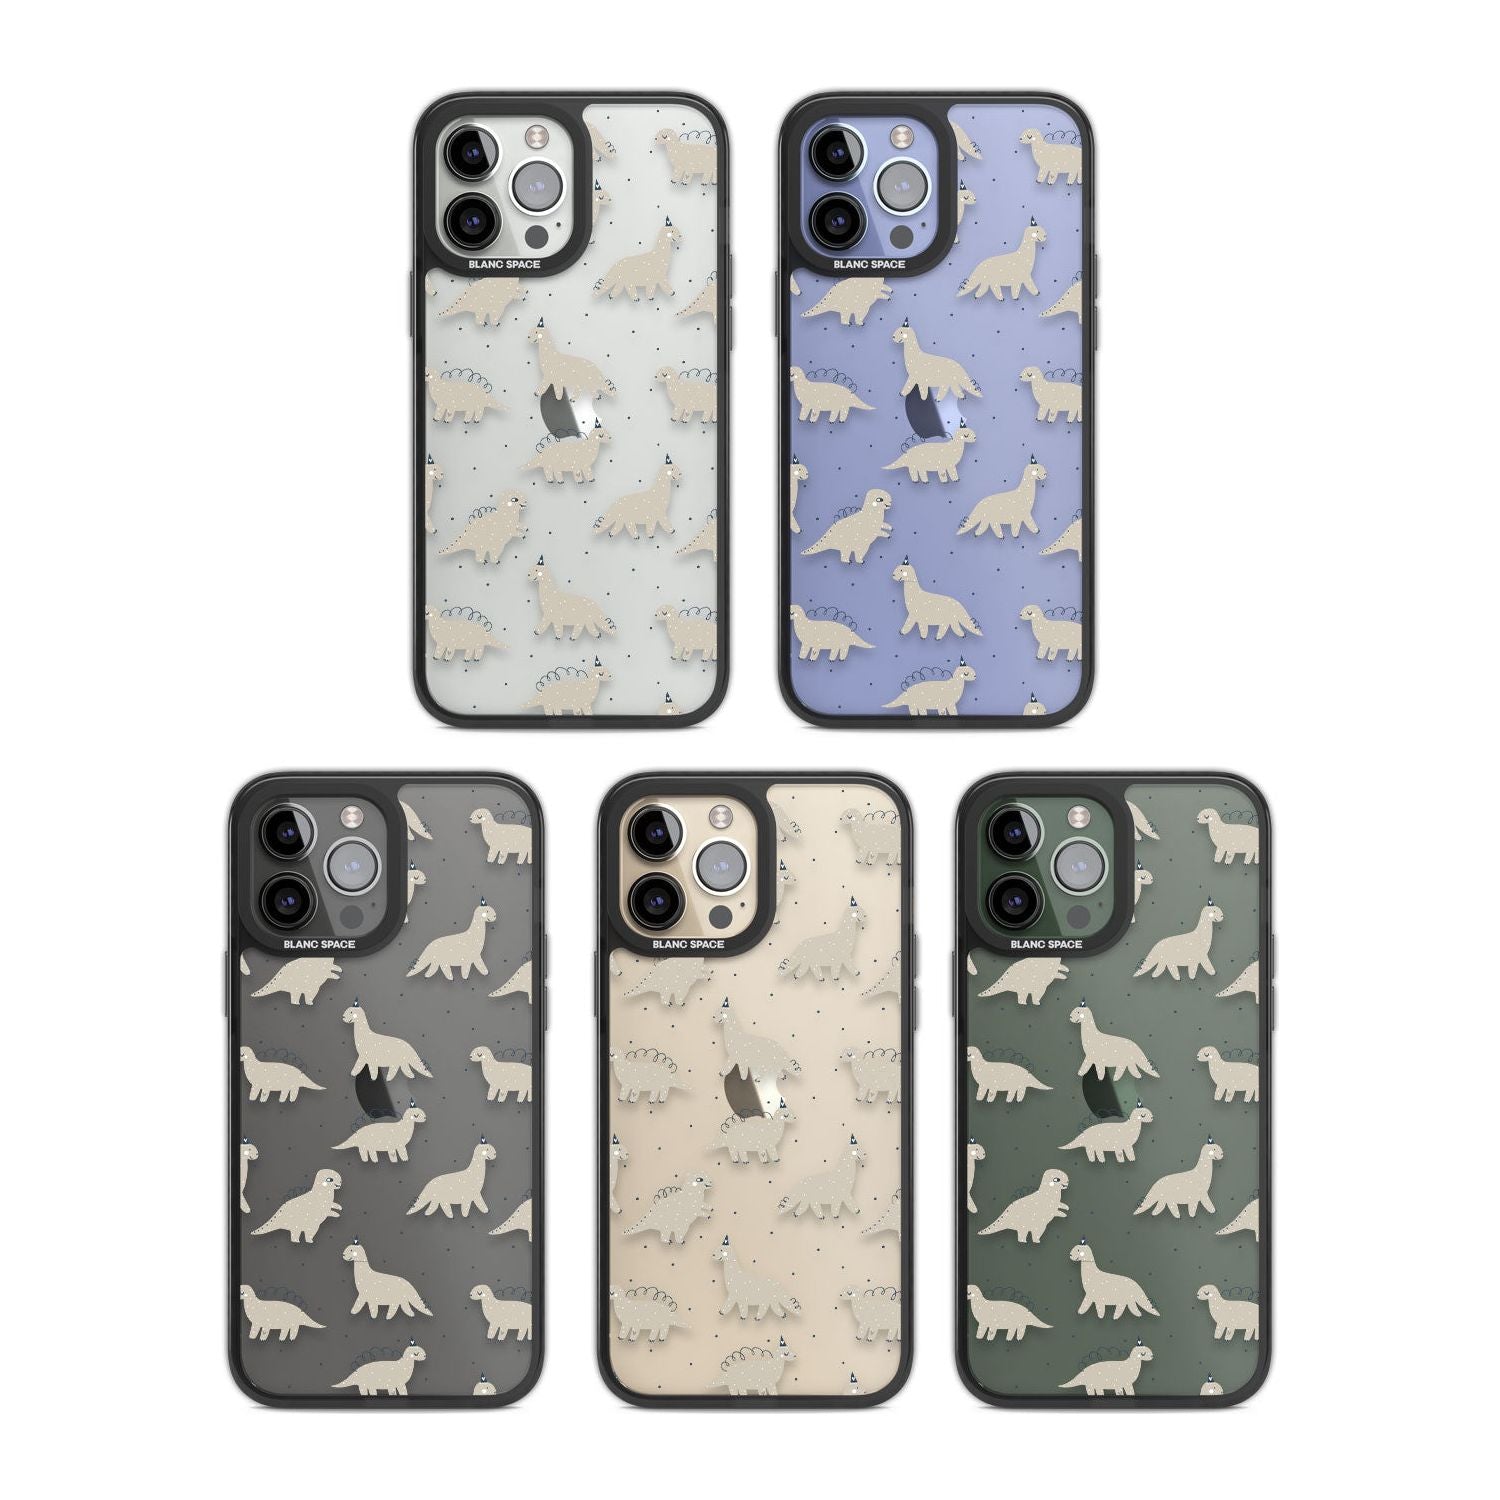 Adorable Dinosaurs Pattern (Clear) Phone Case iPhone 15 Pro Max / Black Impact Case,iPhone 15 Plus / Black Impact Case,iPhone 15 Pro / Black Impact Case,iPhone 15 / Black Impact Case,iPhone 15 Pro Max / Impact Case,iPhone 15 Plus / Impact Case,iPhone 15 Pro / Impact Case,iPhone 15 / Impact Case,iPhone 15 Pro Max / Magsafe Black Impact Case,iPhone 15 Plus / Magsafe Black Impact Case,iPhone 15 Pro / Magsafe Black Impact Case,iPhone 15 / Magsafe Black Impact Case,iPhone 14 Pro Max / Black Impact Case,iPhone 14